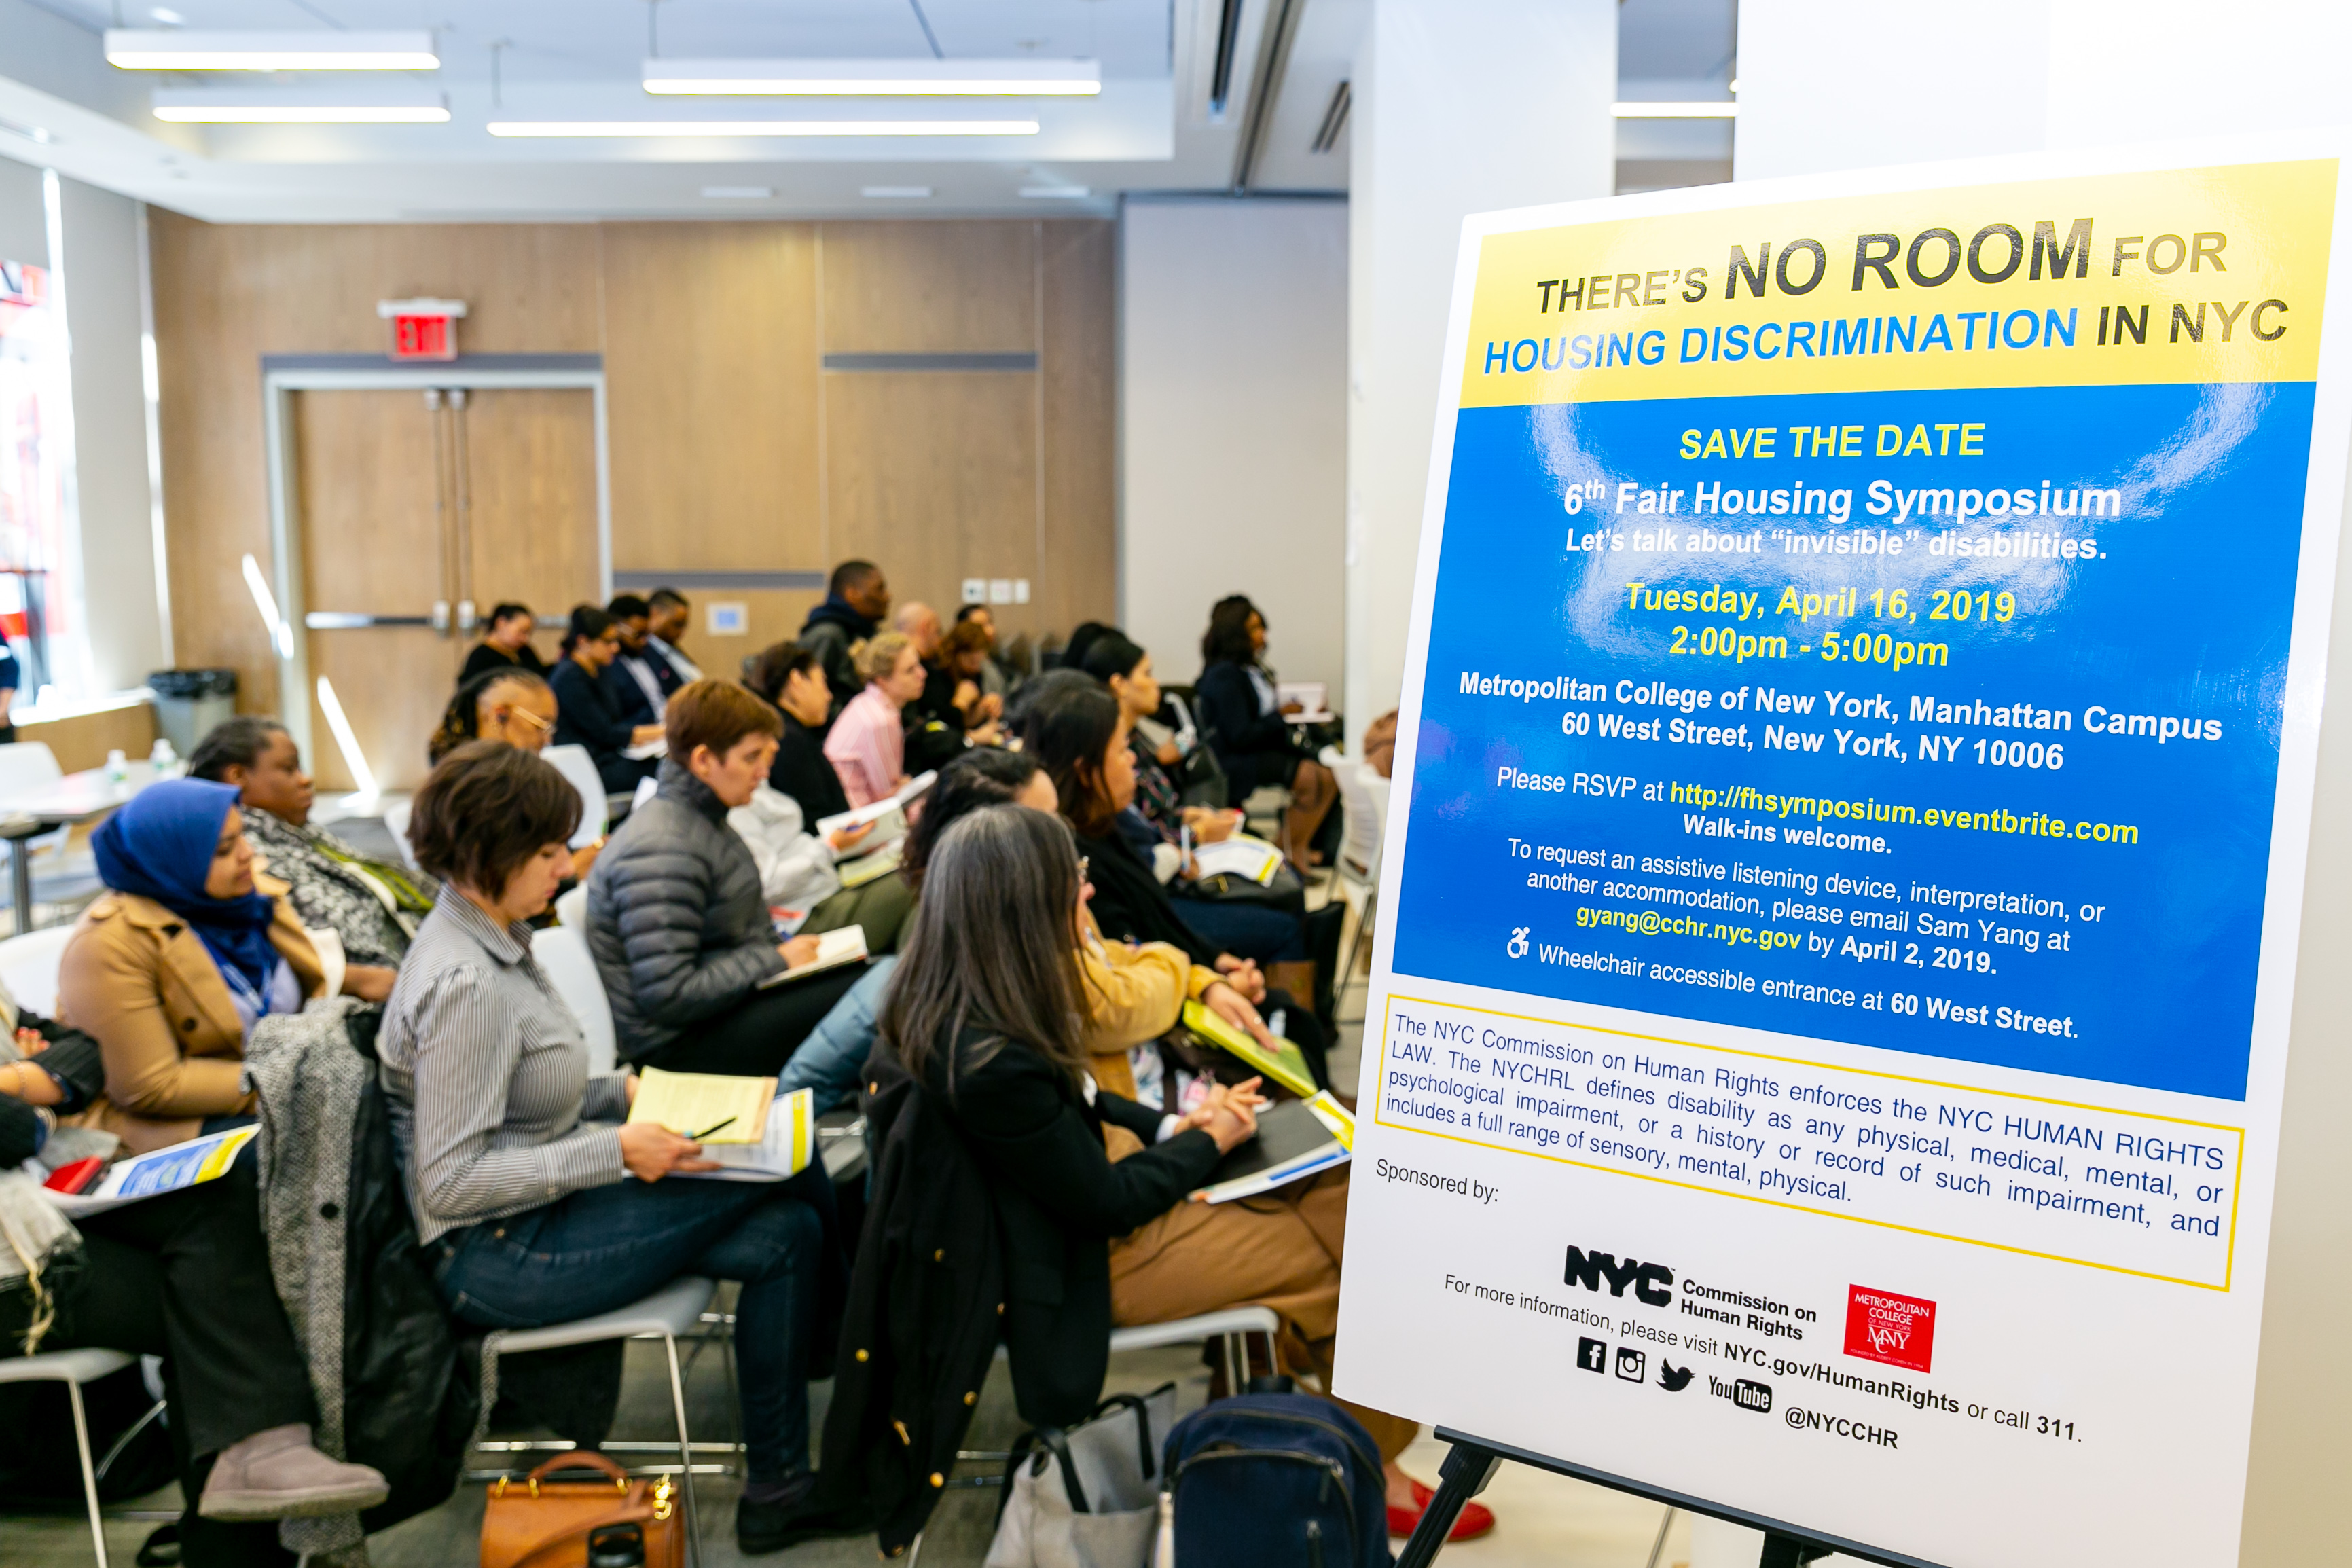 Profile of audience sitting at event next to a sign that reads “There’s No Room For Housing Discrimination in NYC,” 6th Fair Housing Symposium, Tuesday, April 16, 2019.